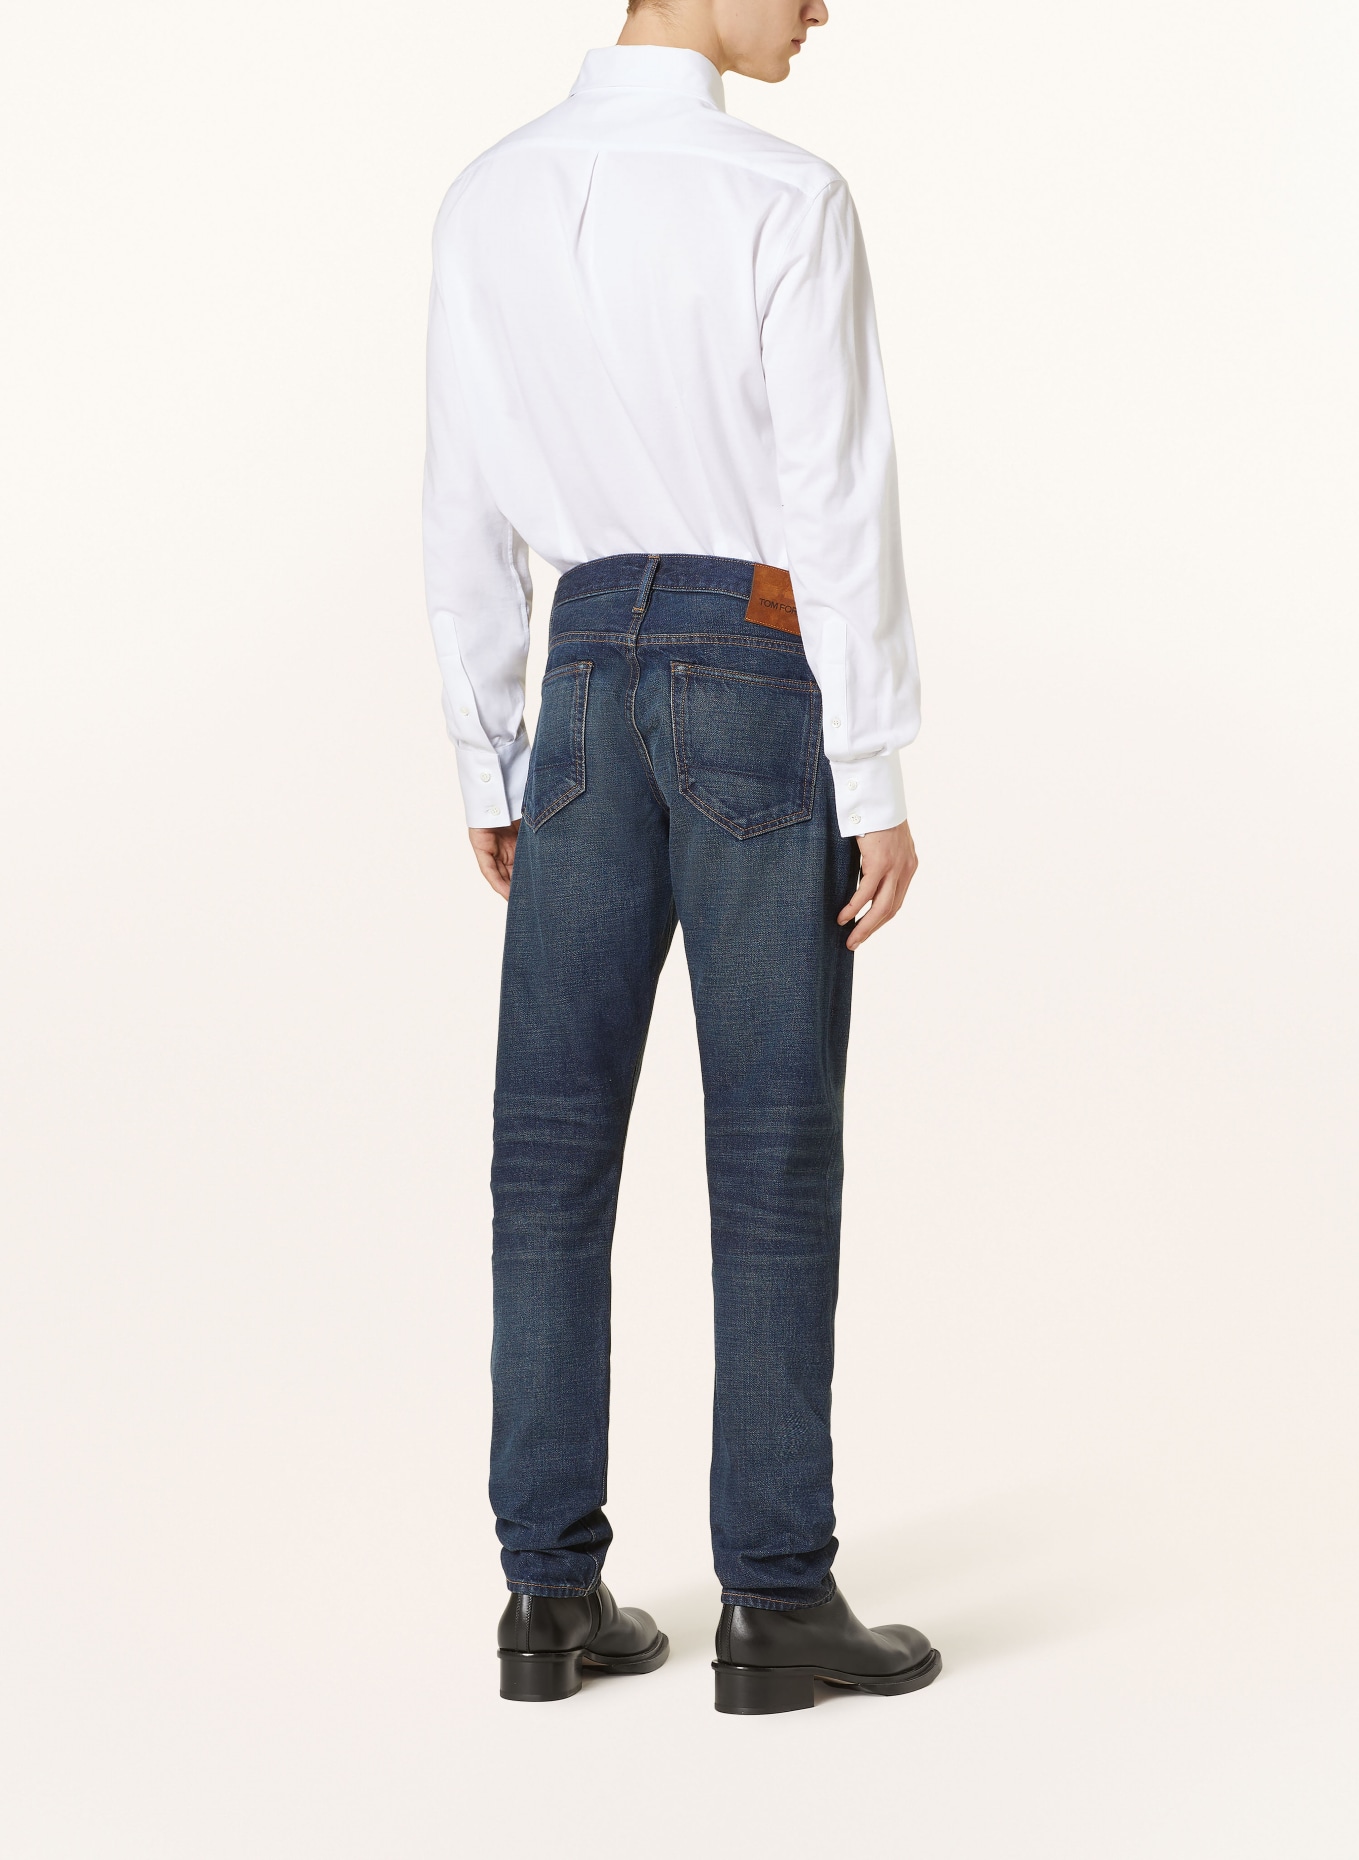 TOM FORD Jeans Standard Fit, Farbe: HB523 STRONG HIGH/LOW BLUE (Bild 3)